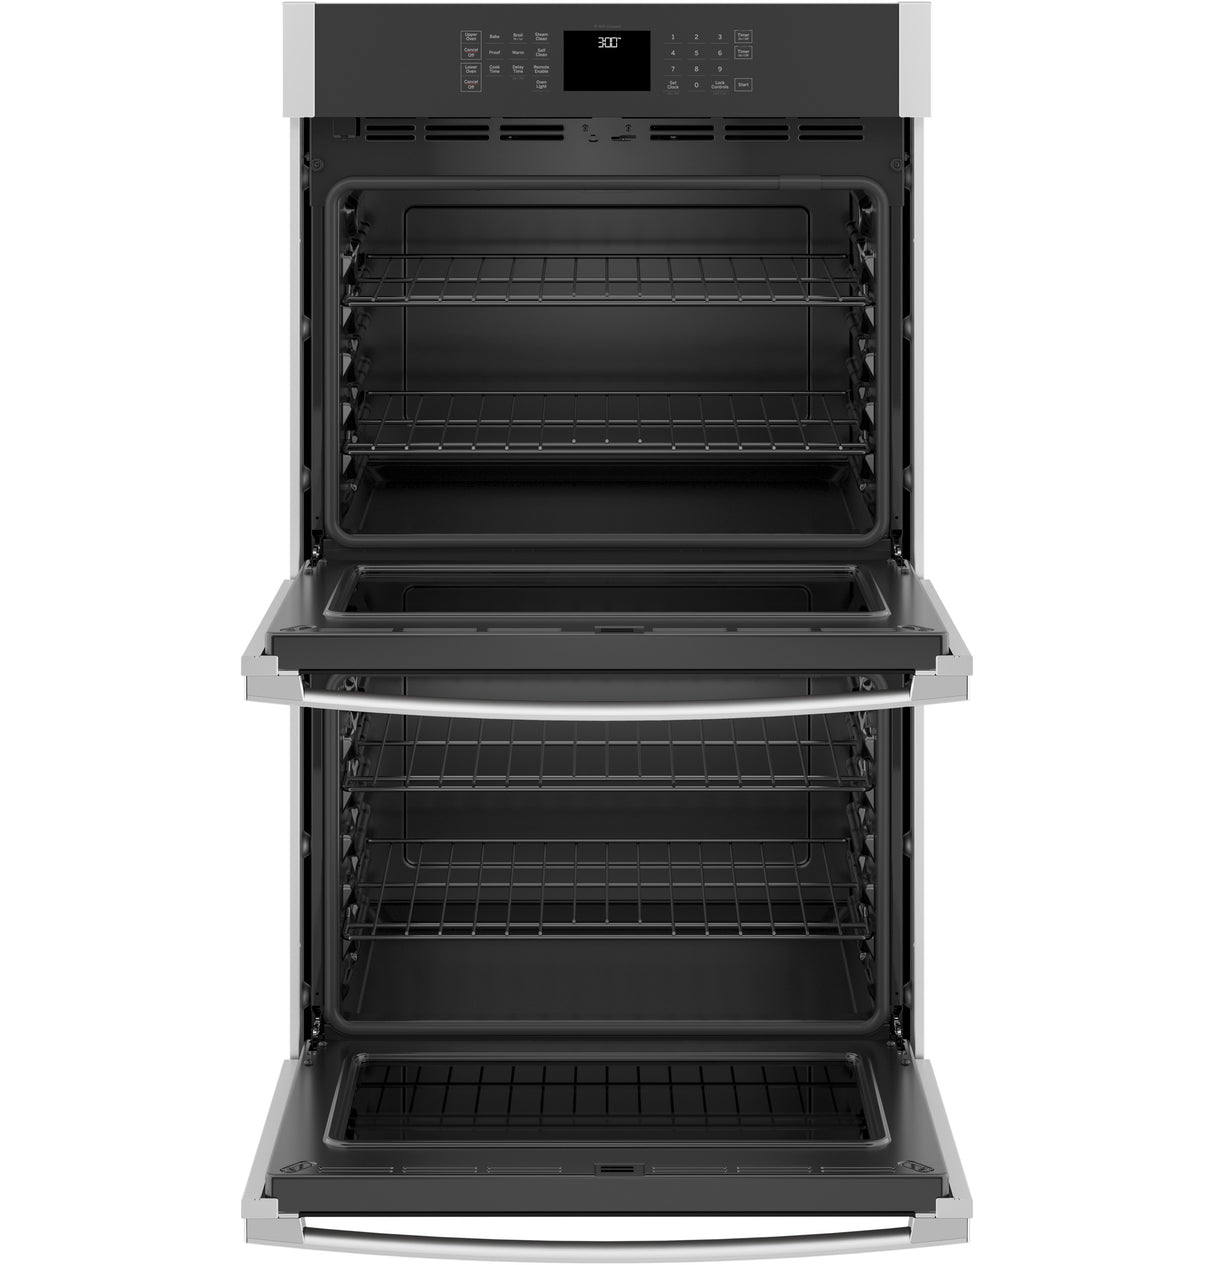 GE(R) 30" Smart Built-In Self-Clean Double Wall Oven with Never-Scrub Racks - (JTD3000SNSS)